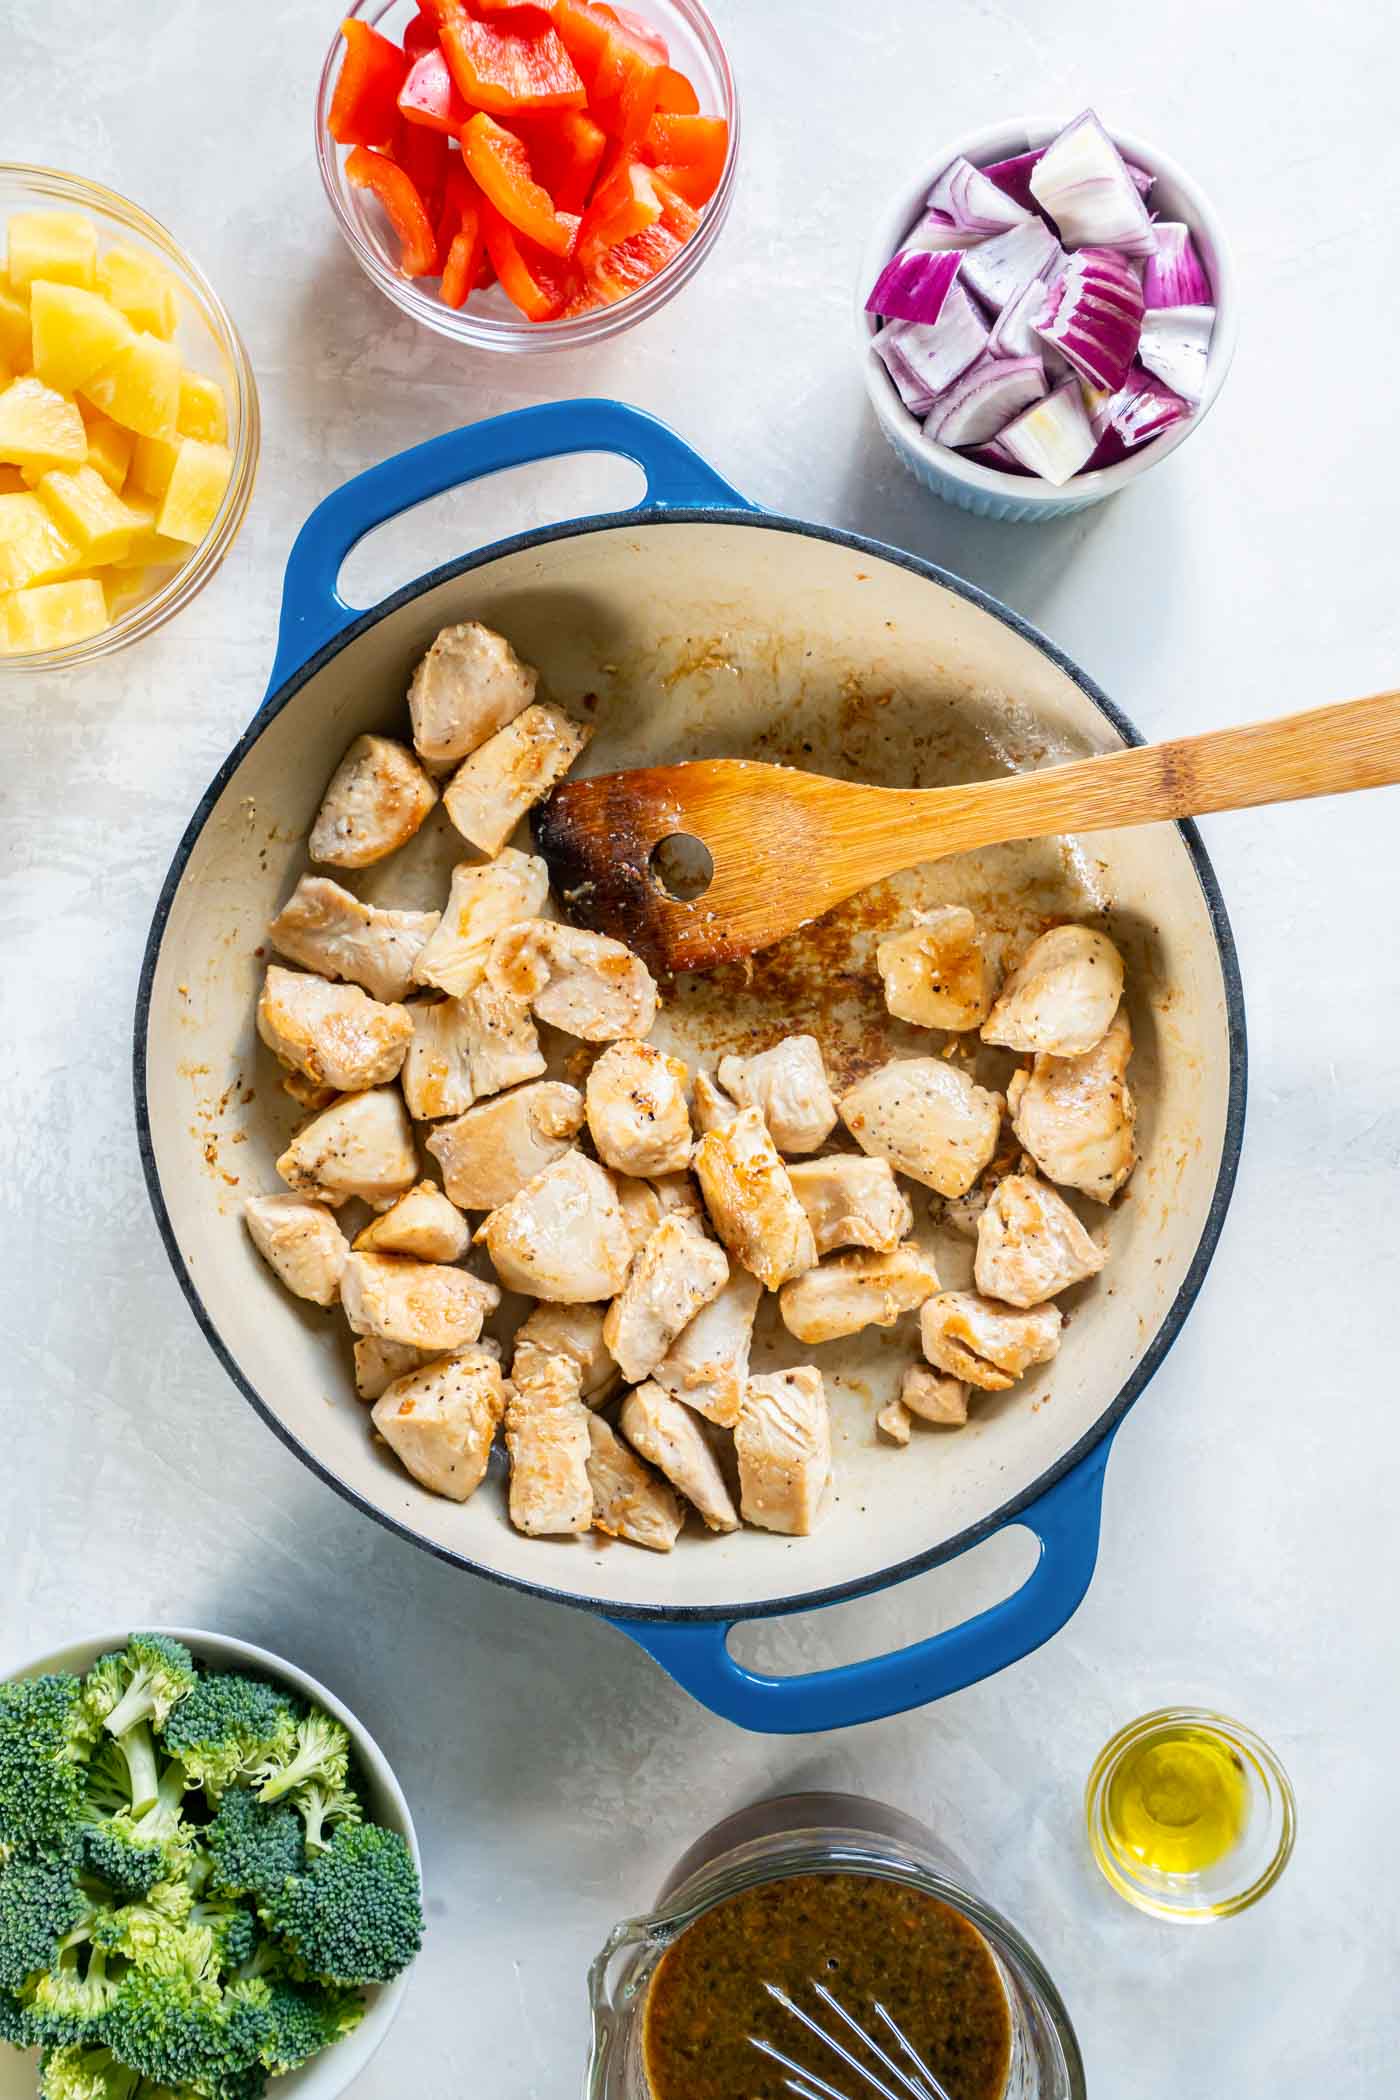 Browning chicken breast pieces in pan with wooden spoon.